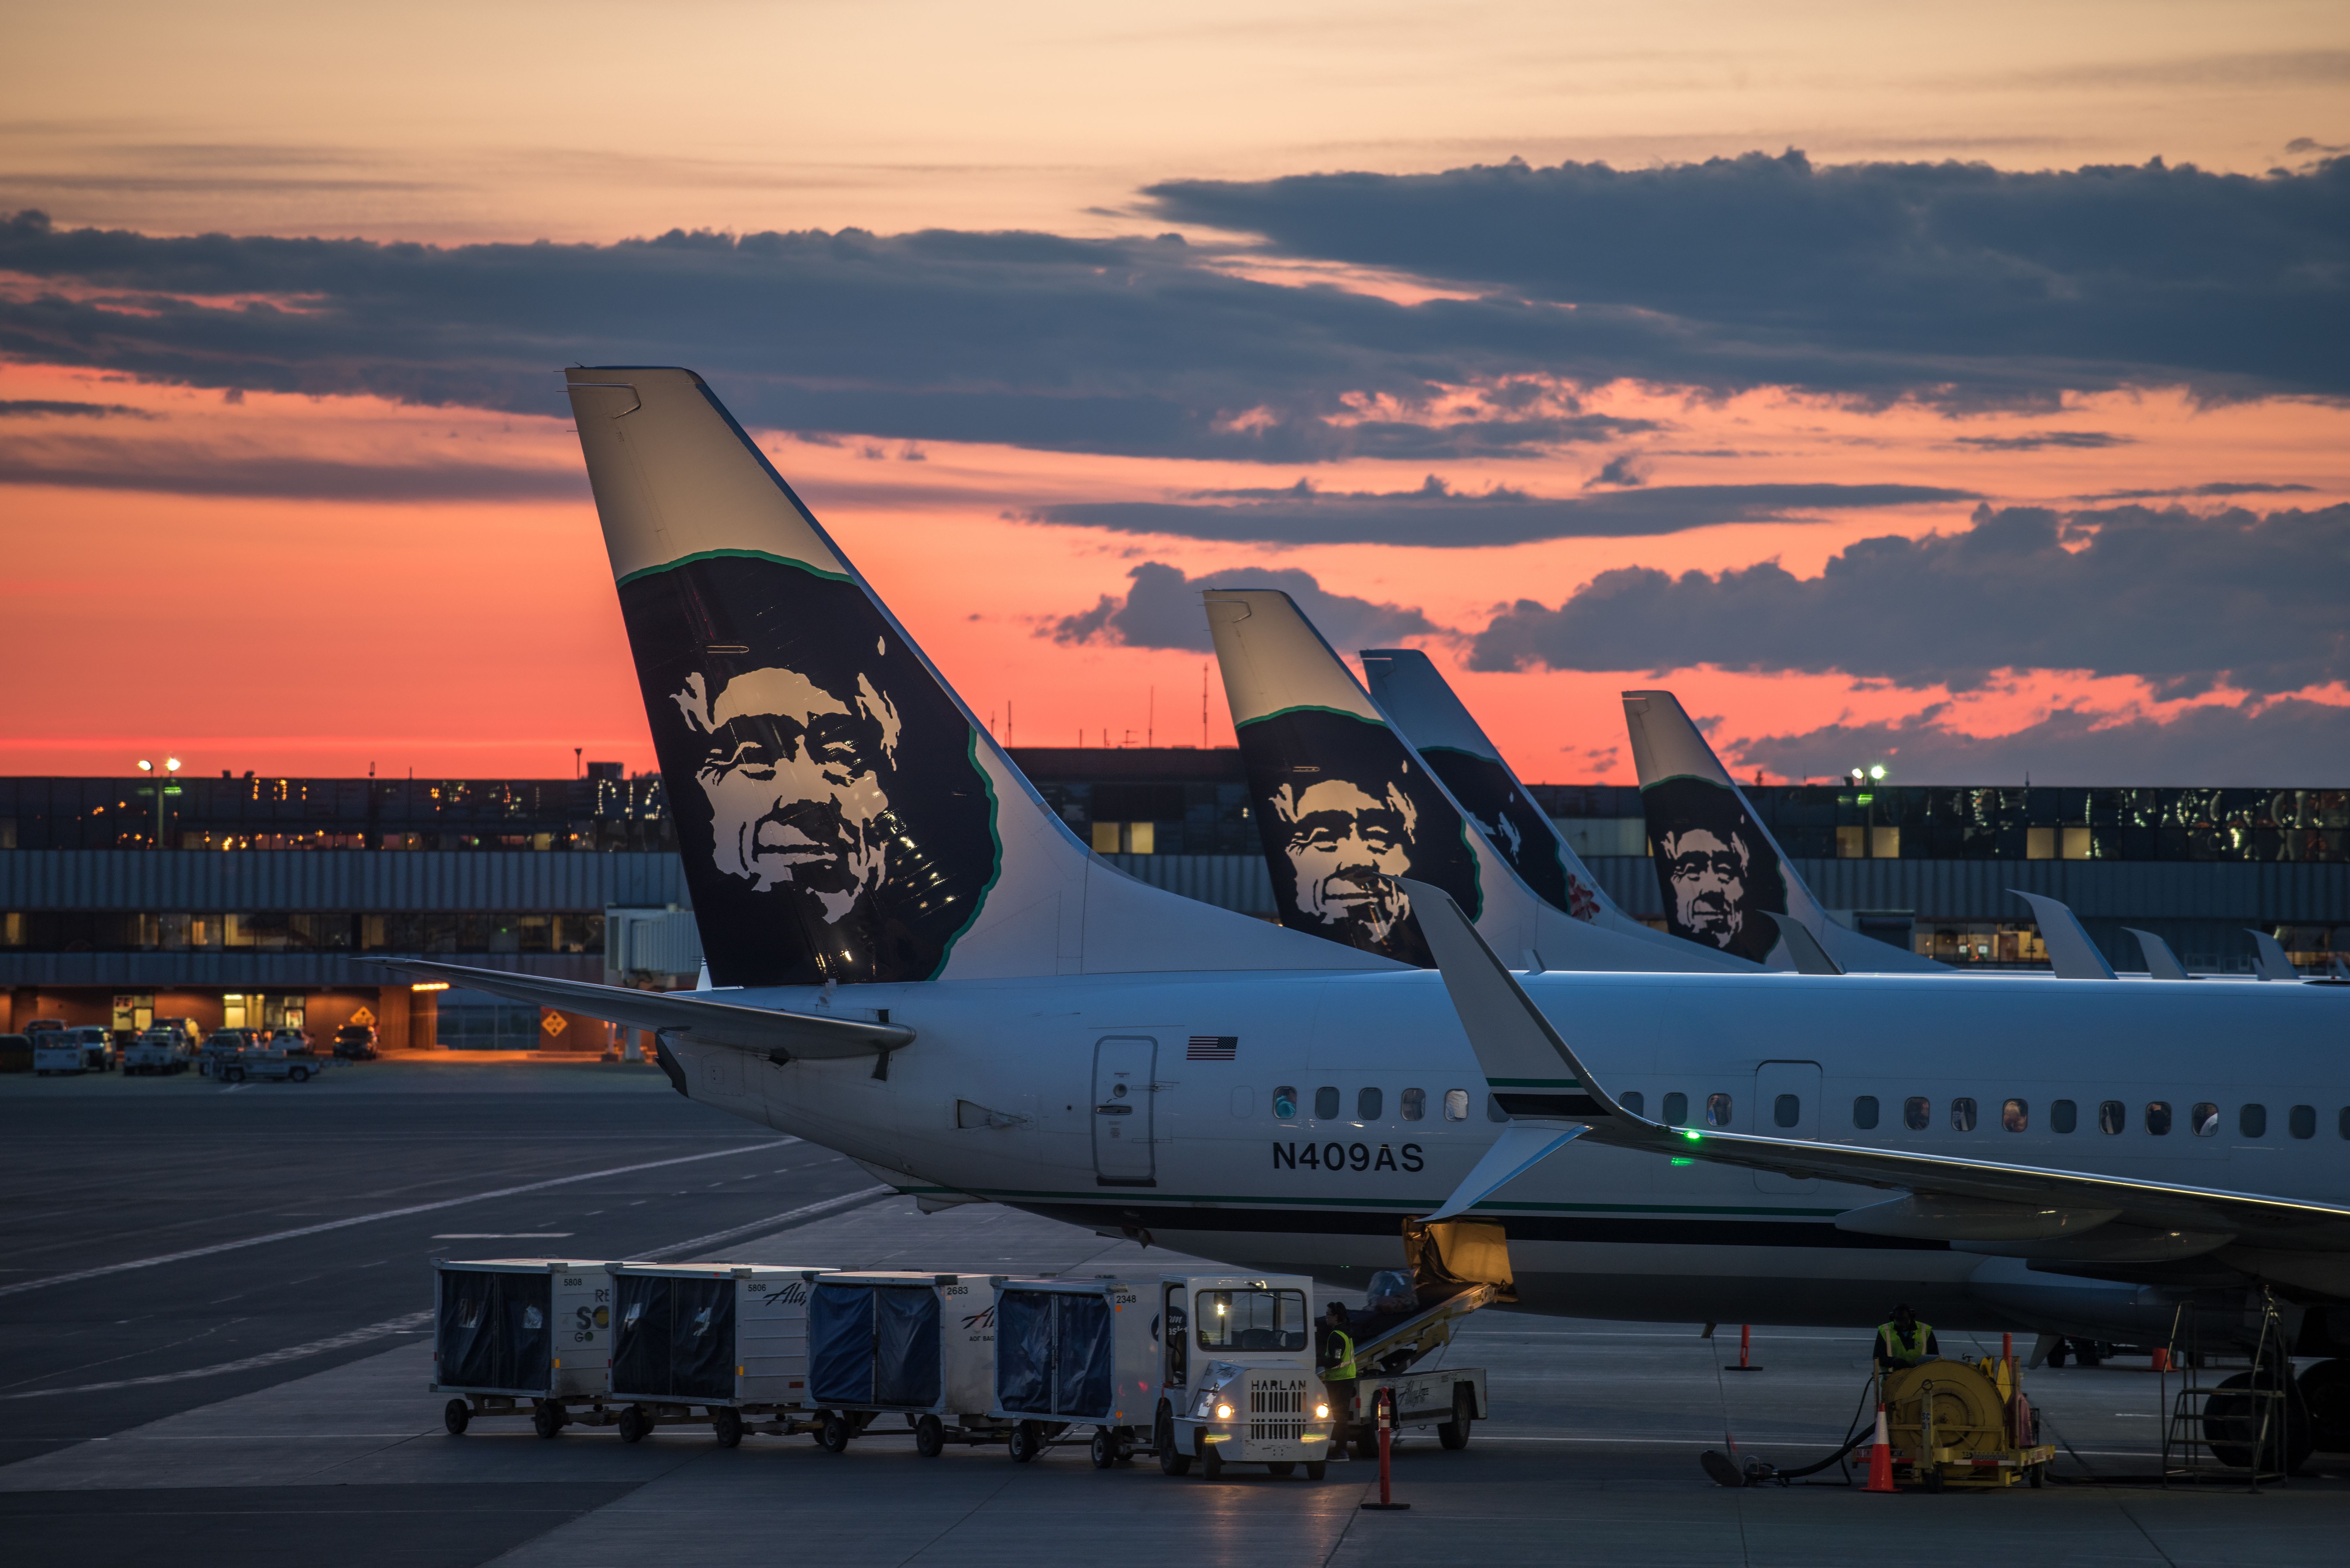 Alaska Airlines aircraft at Anchorage Ted Stevens International Airport